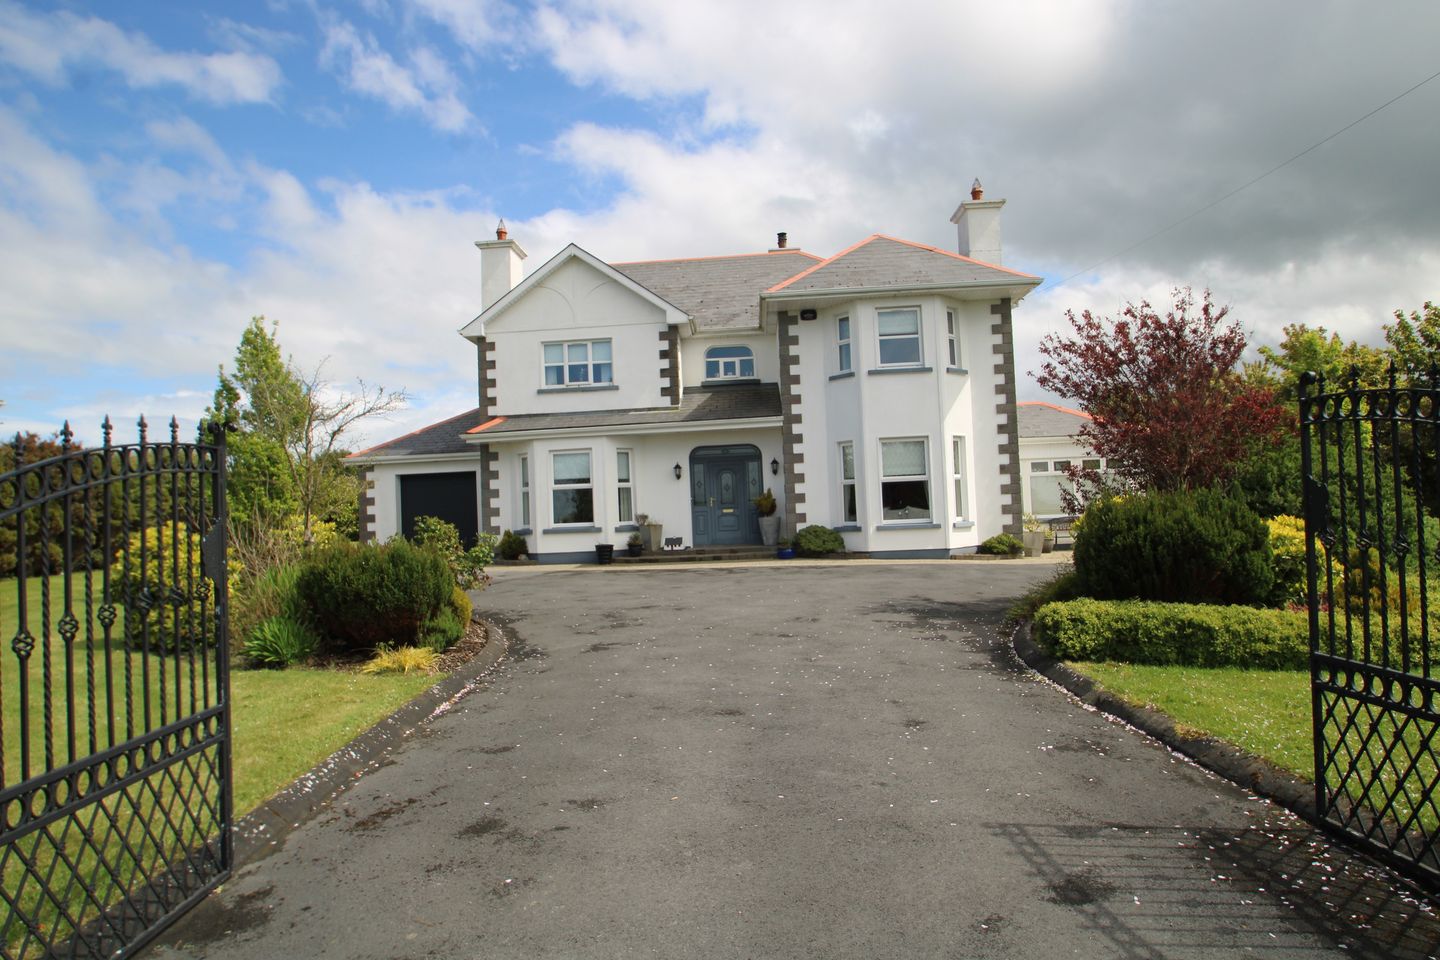 Zion House, Carnmore West, Oranmore, Co. Galway, H91KDE5